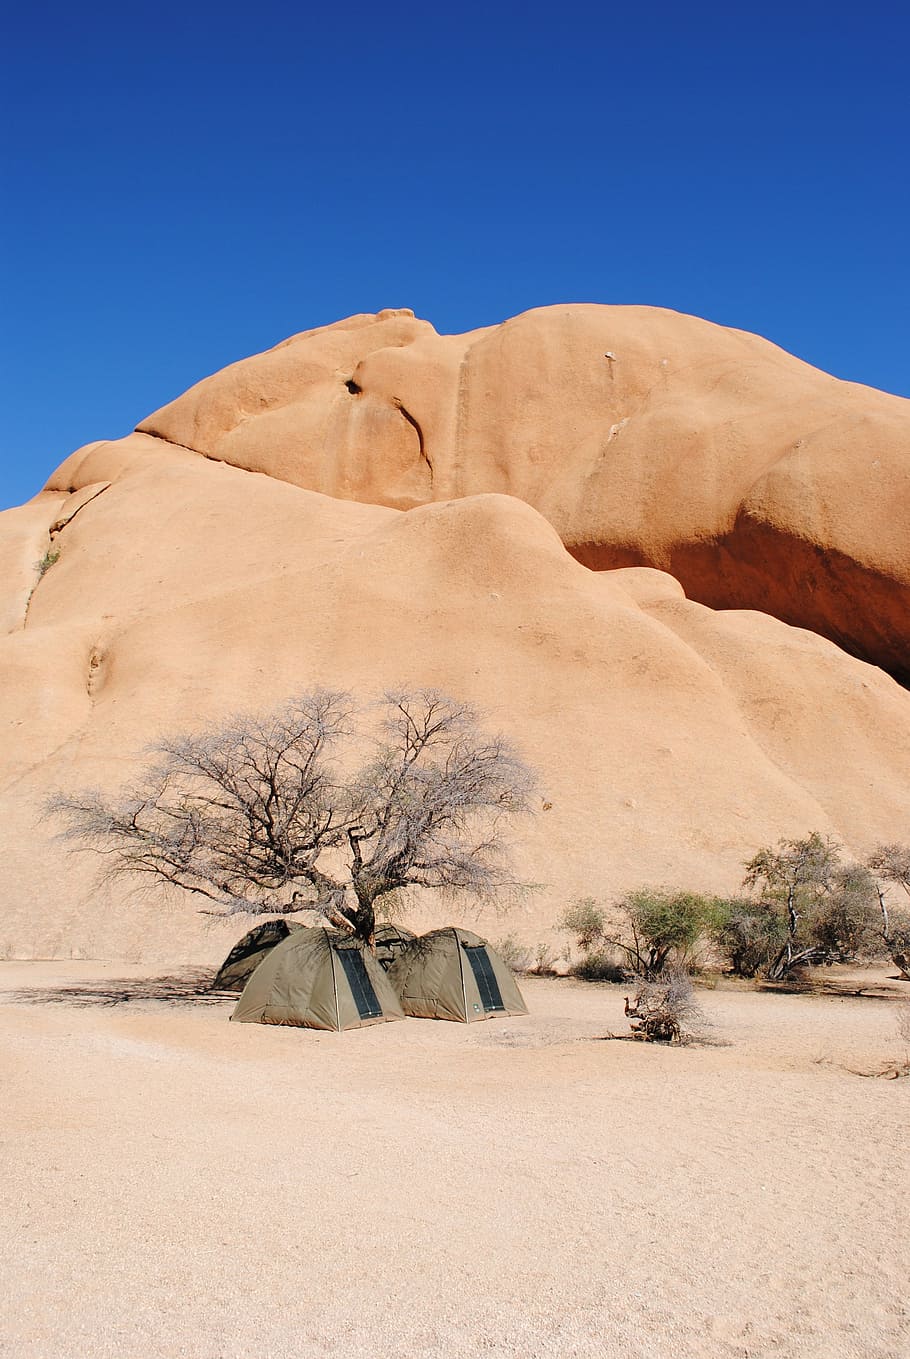 spitzkoppe, camping, namibia, africa, mountains, wildlife, wilderness, outdoor, adventure, sky